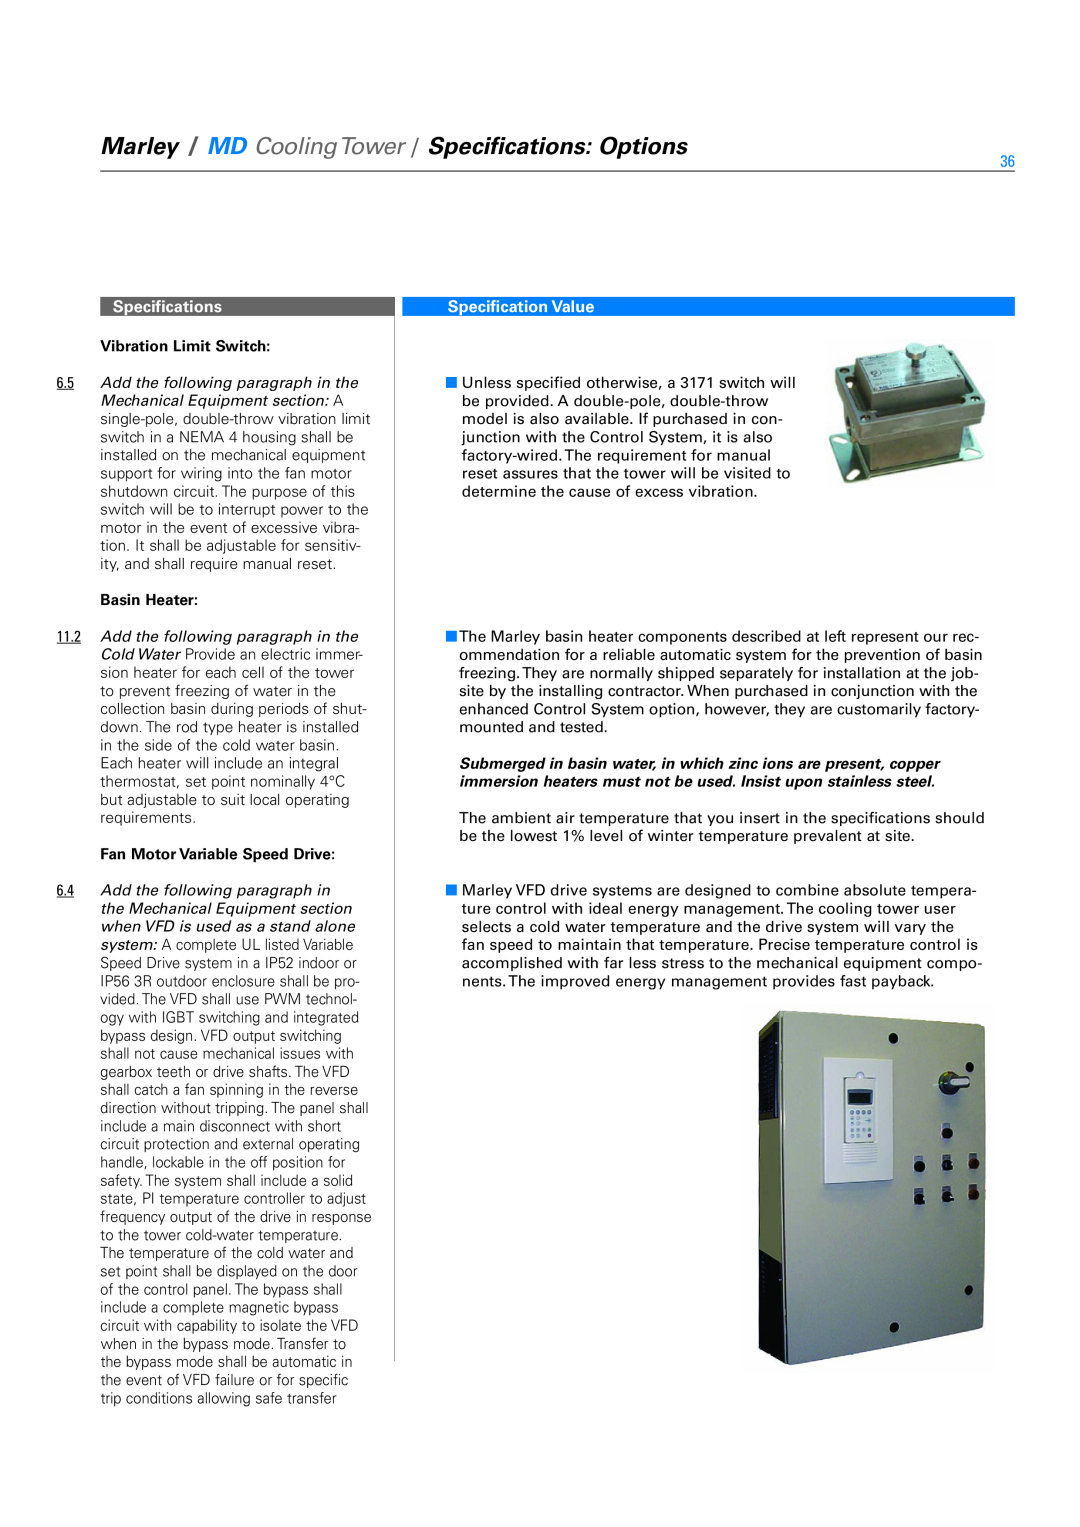 SPX Cooling Technologies Marley MD specifications Specifications, Specification Value, Vibration Limit Switch, Basin Heater 